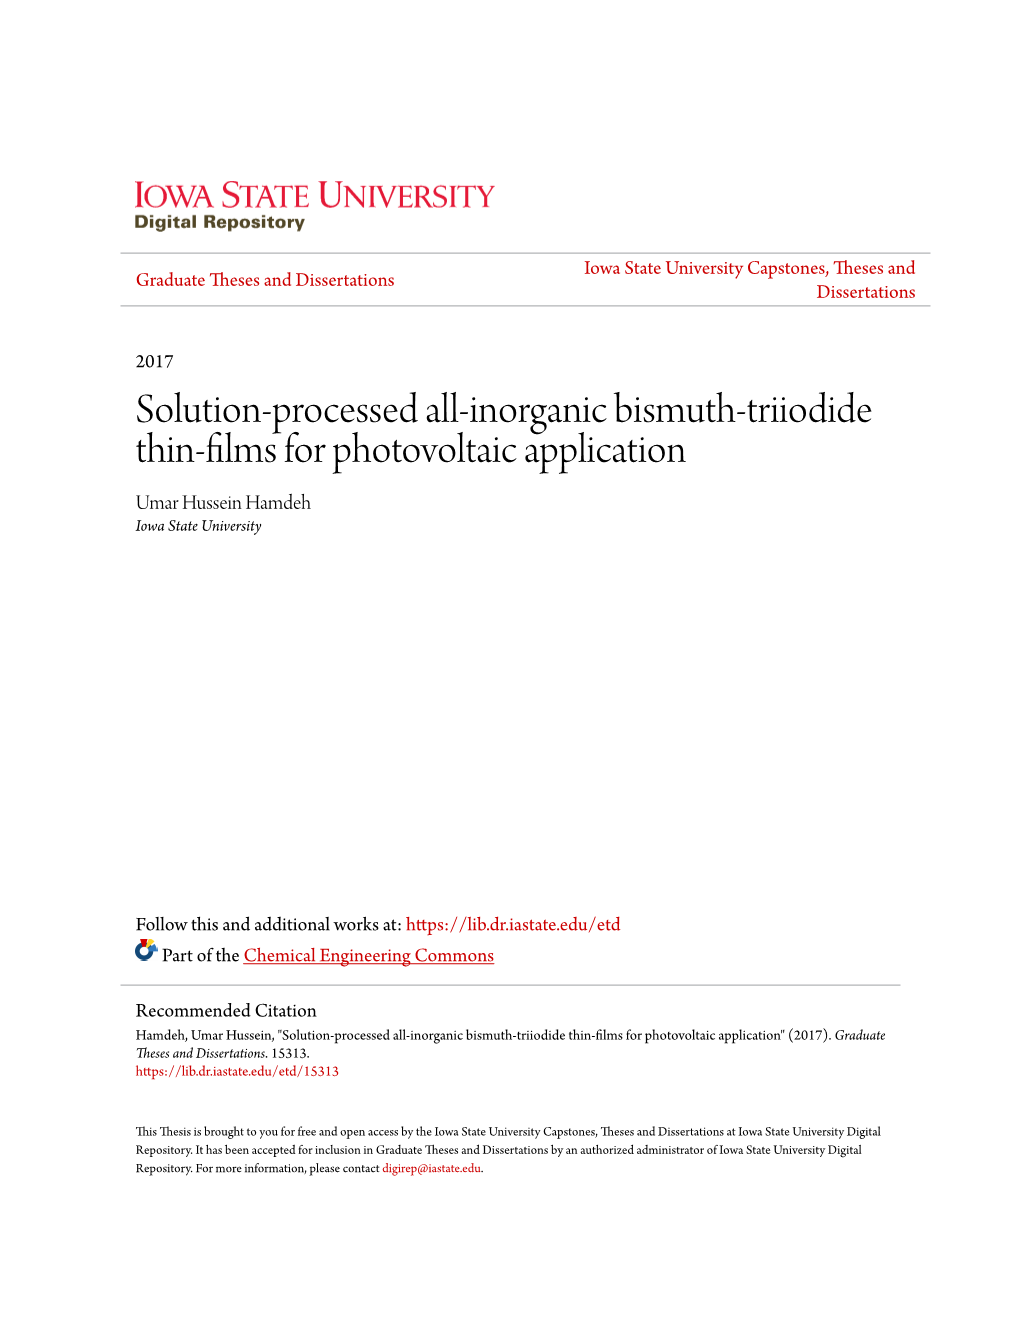 Solution-Processed All-Inorganic Bismuth-Triiodide Thin-Films for Photovoltaic Application Umar Hussein Hamdeh Iowa State University